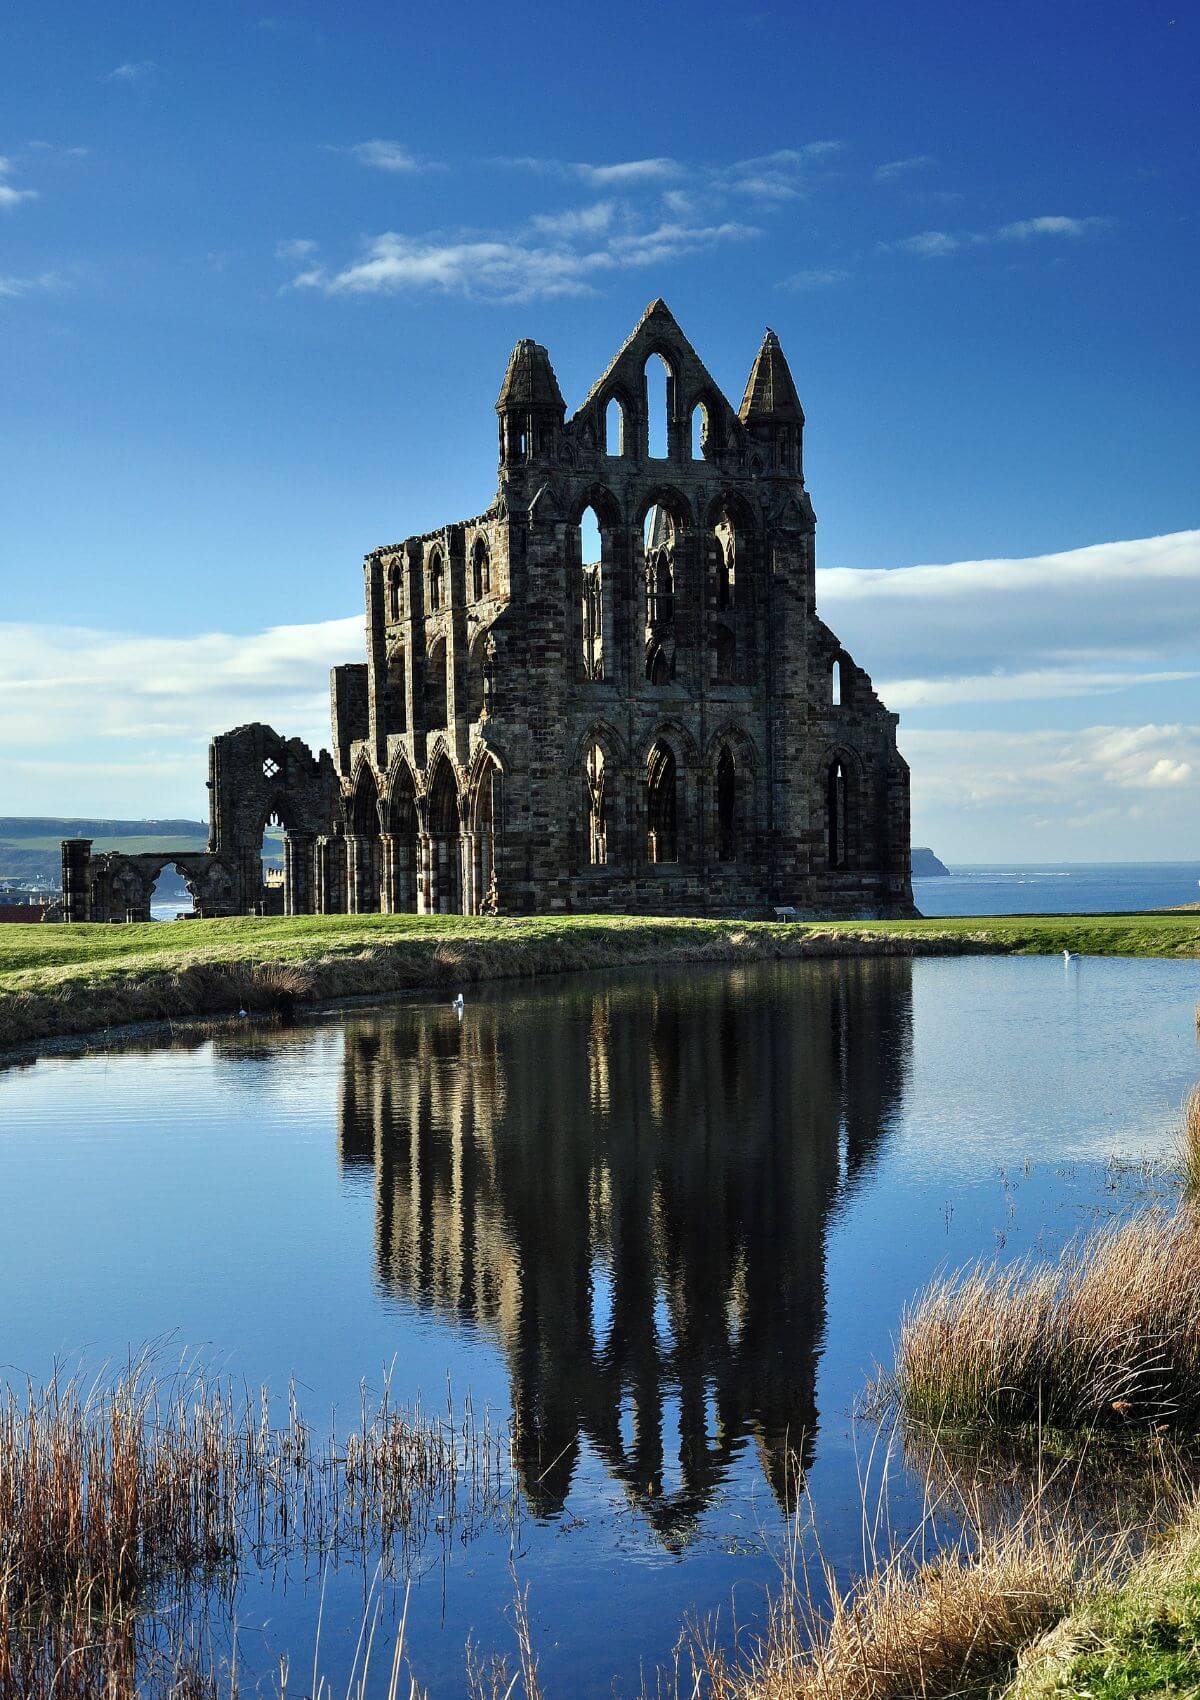 Whitby Abbey in North Yorkshire, England